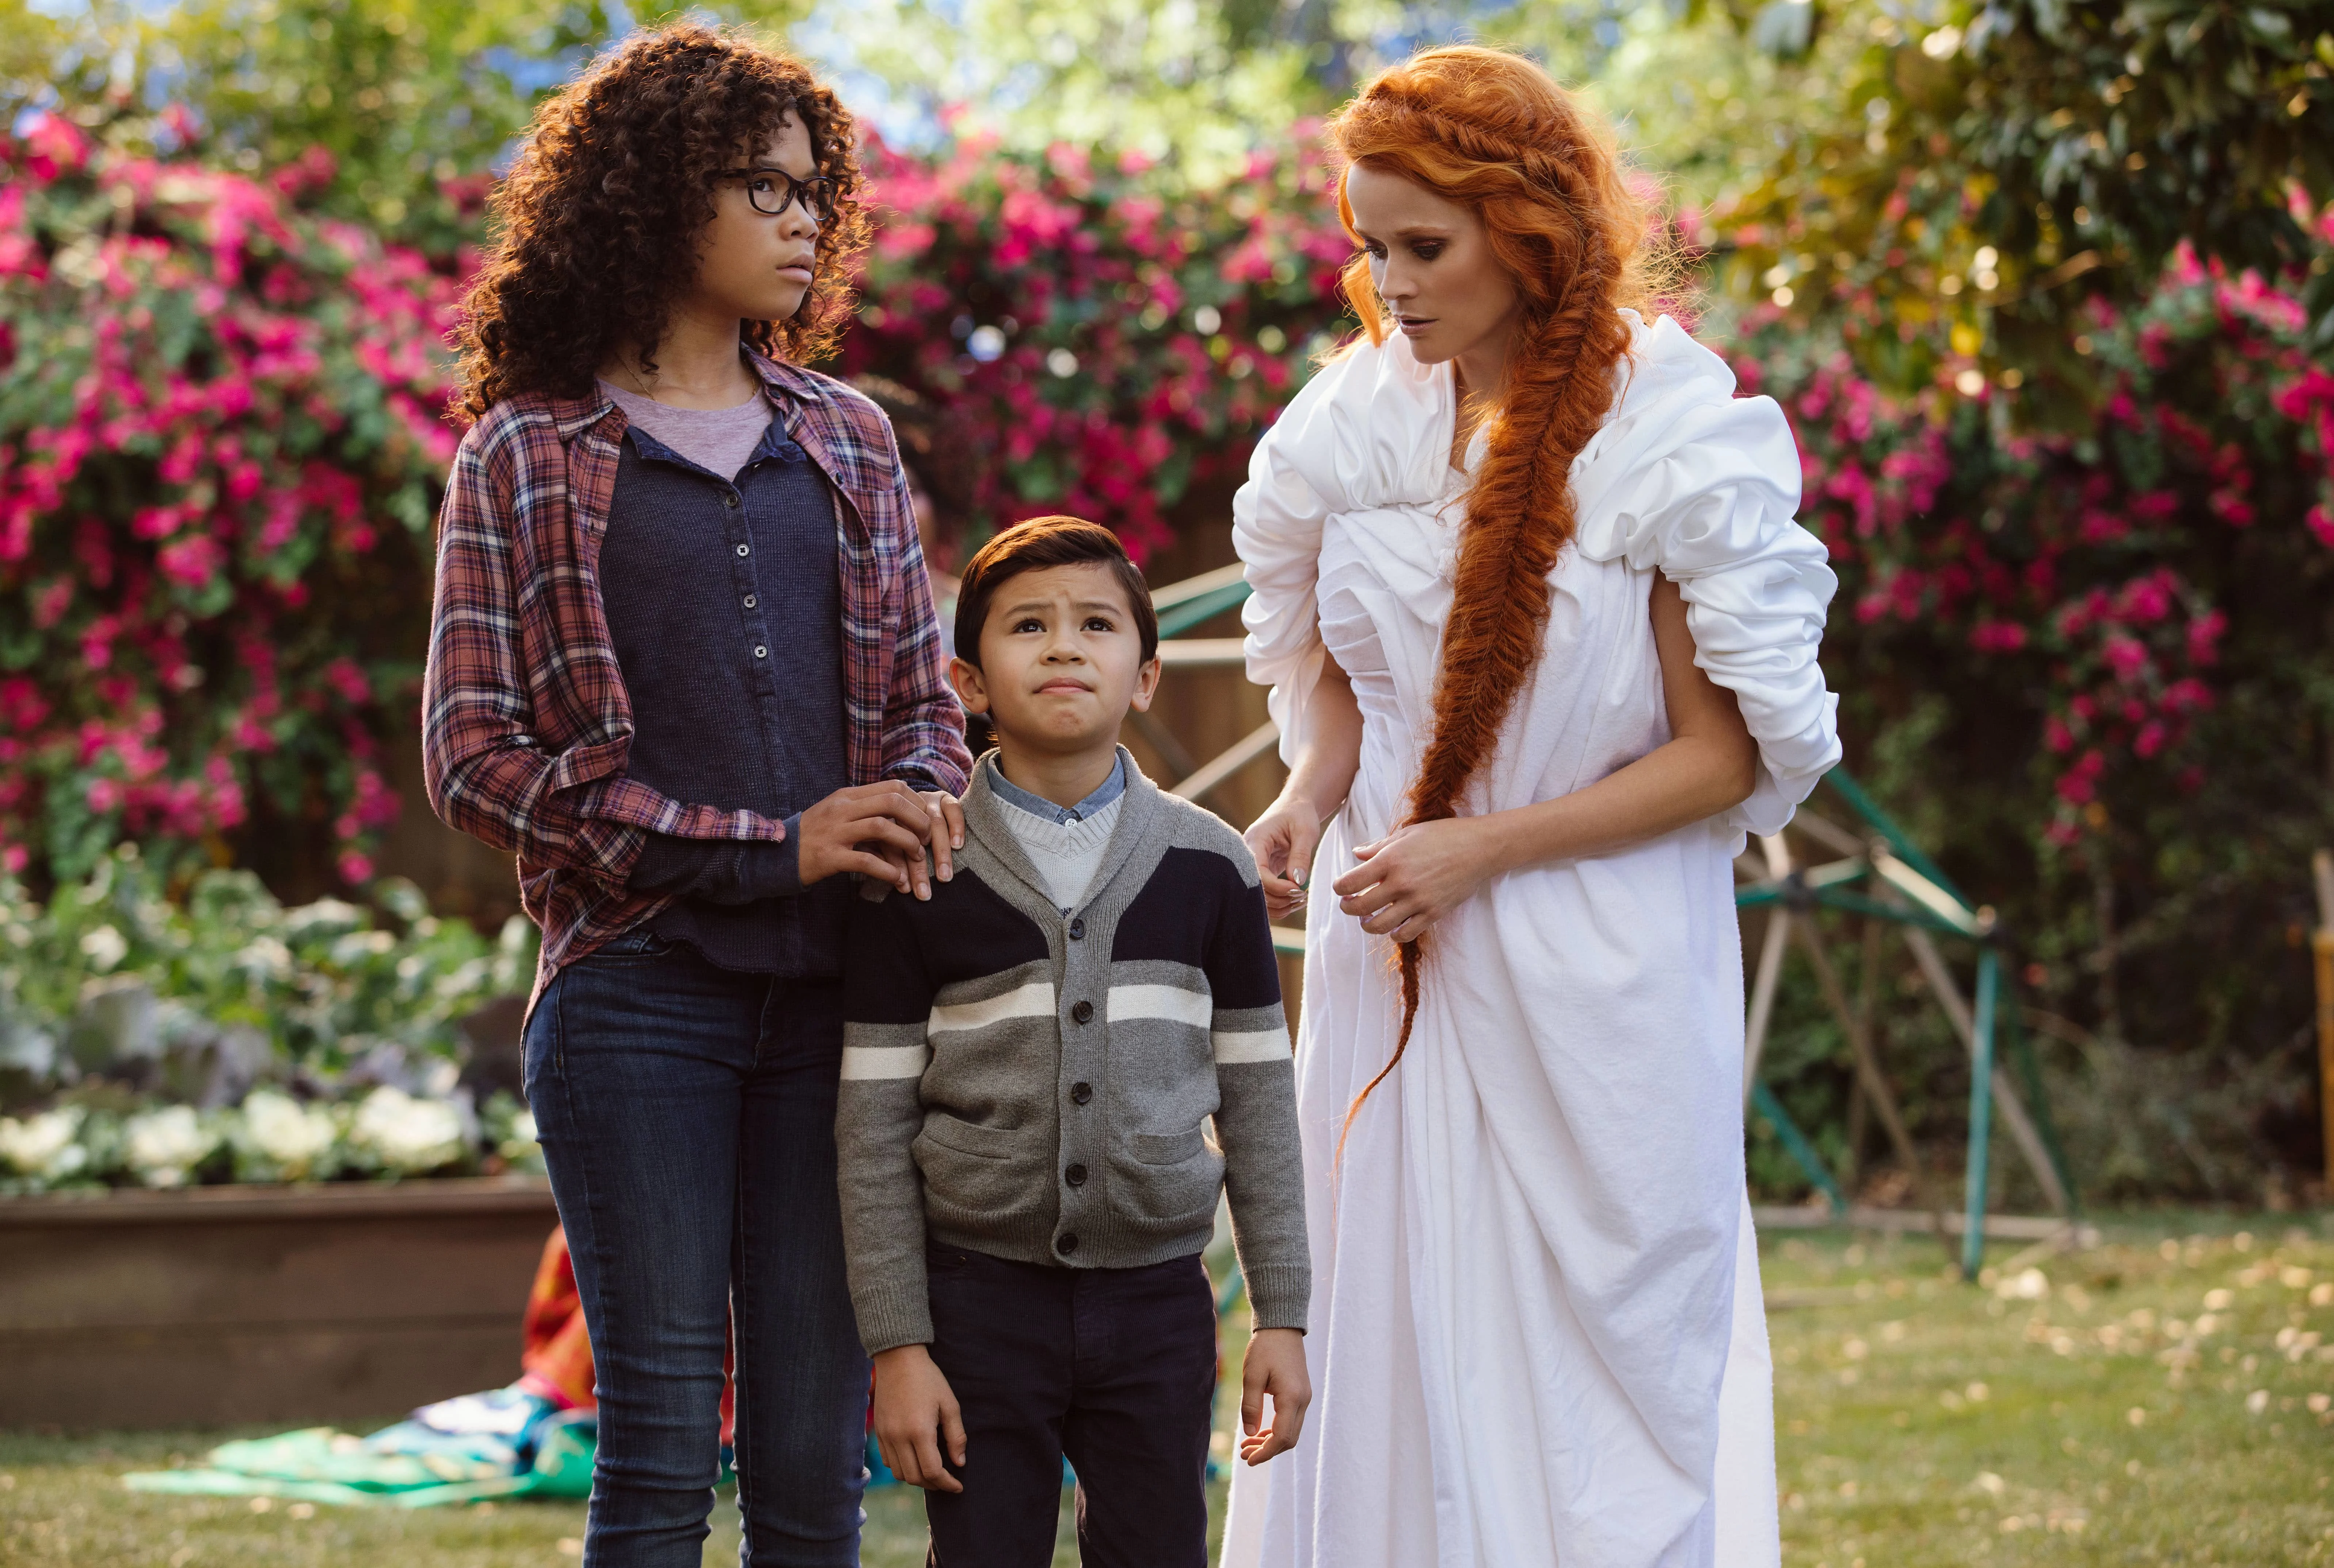 Enter to Win A Wrinkle In Time Digital Copy (Ends 7/6) #WrinkleInTimeBluray